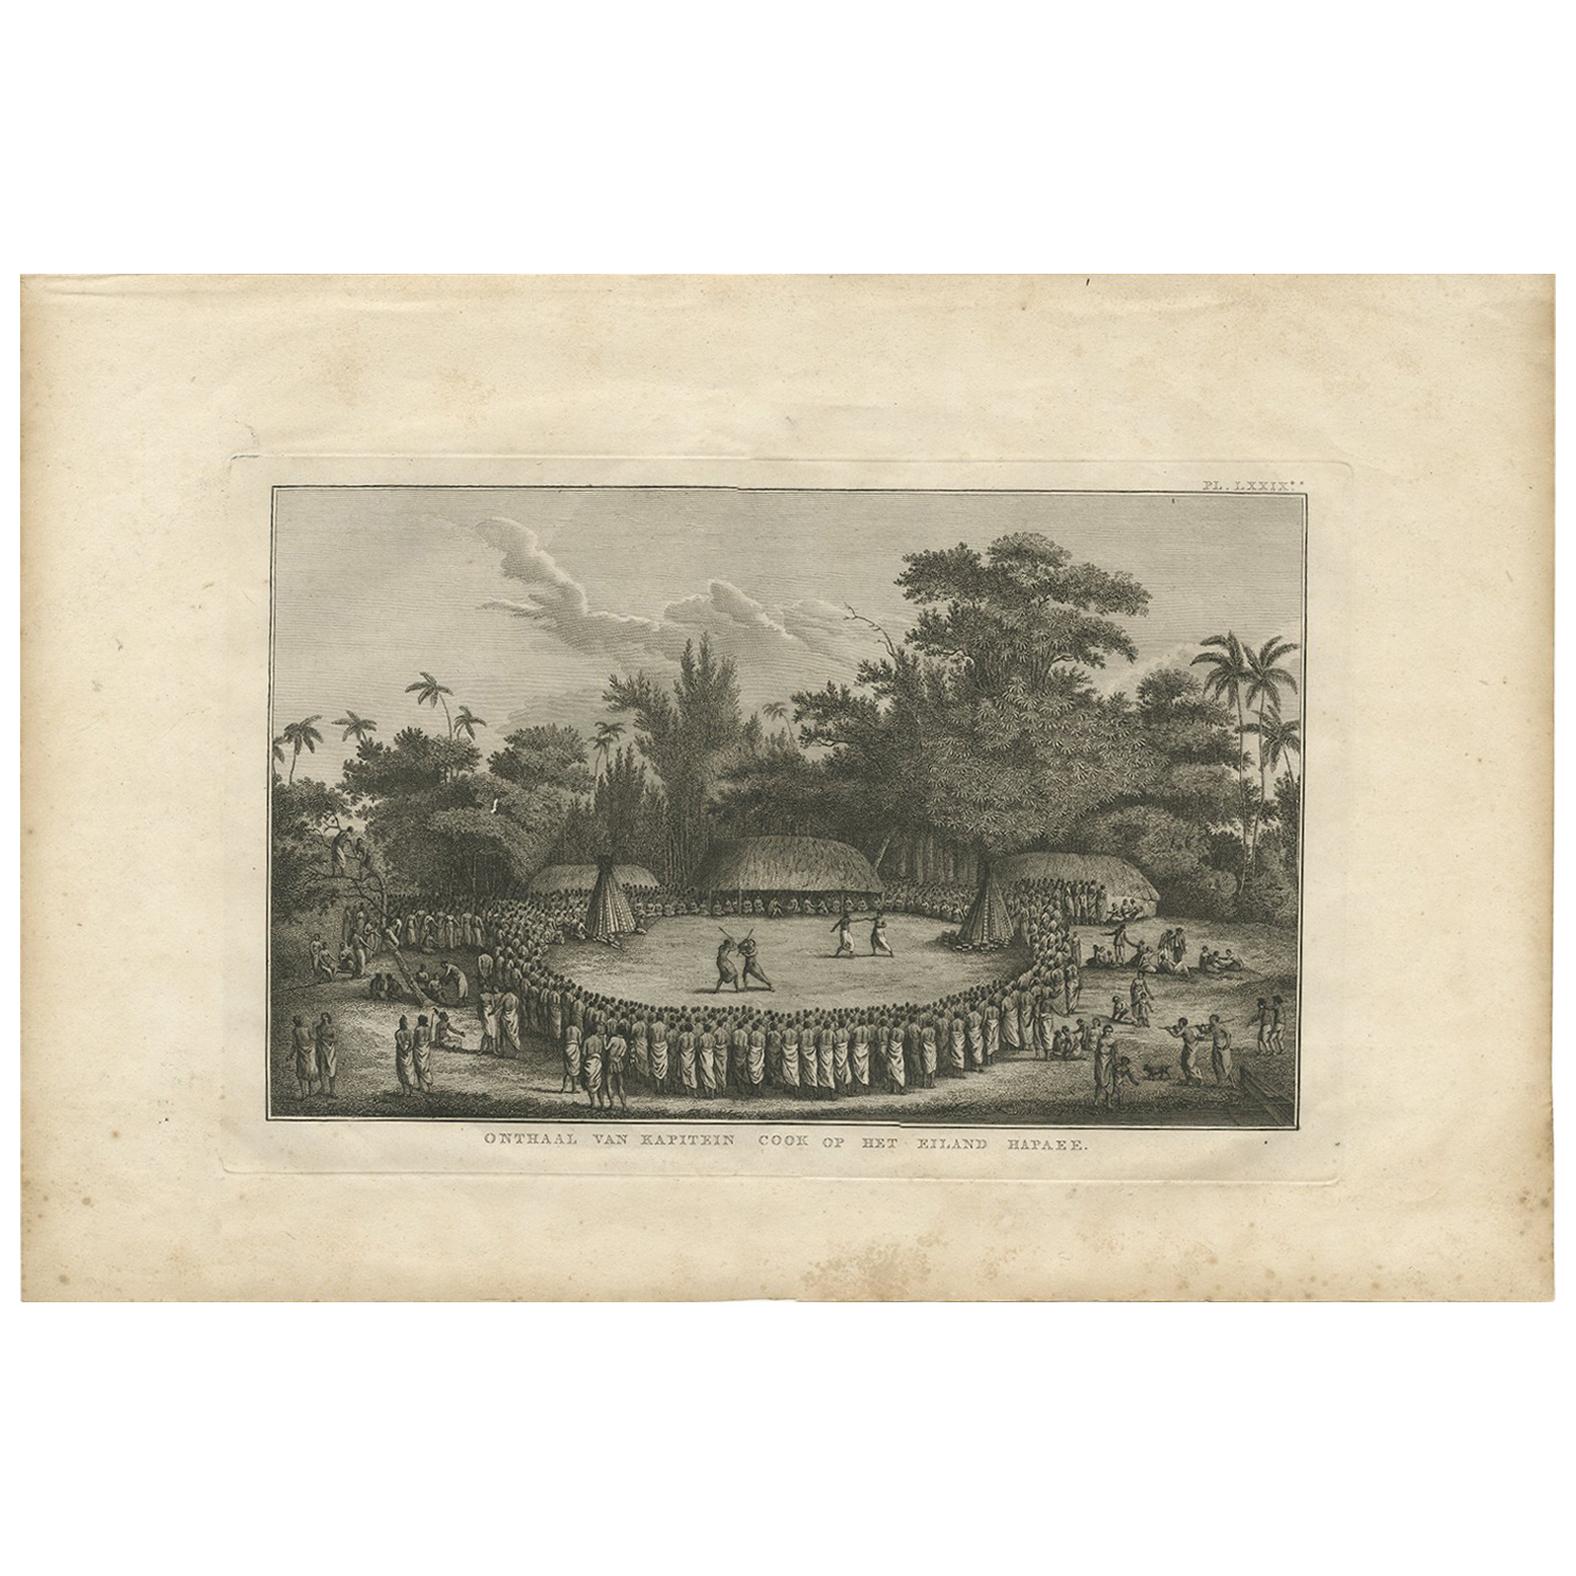 Antique Print of the Arrival of Captain Cook, 1803